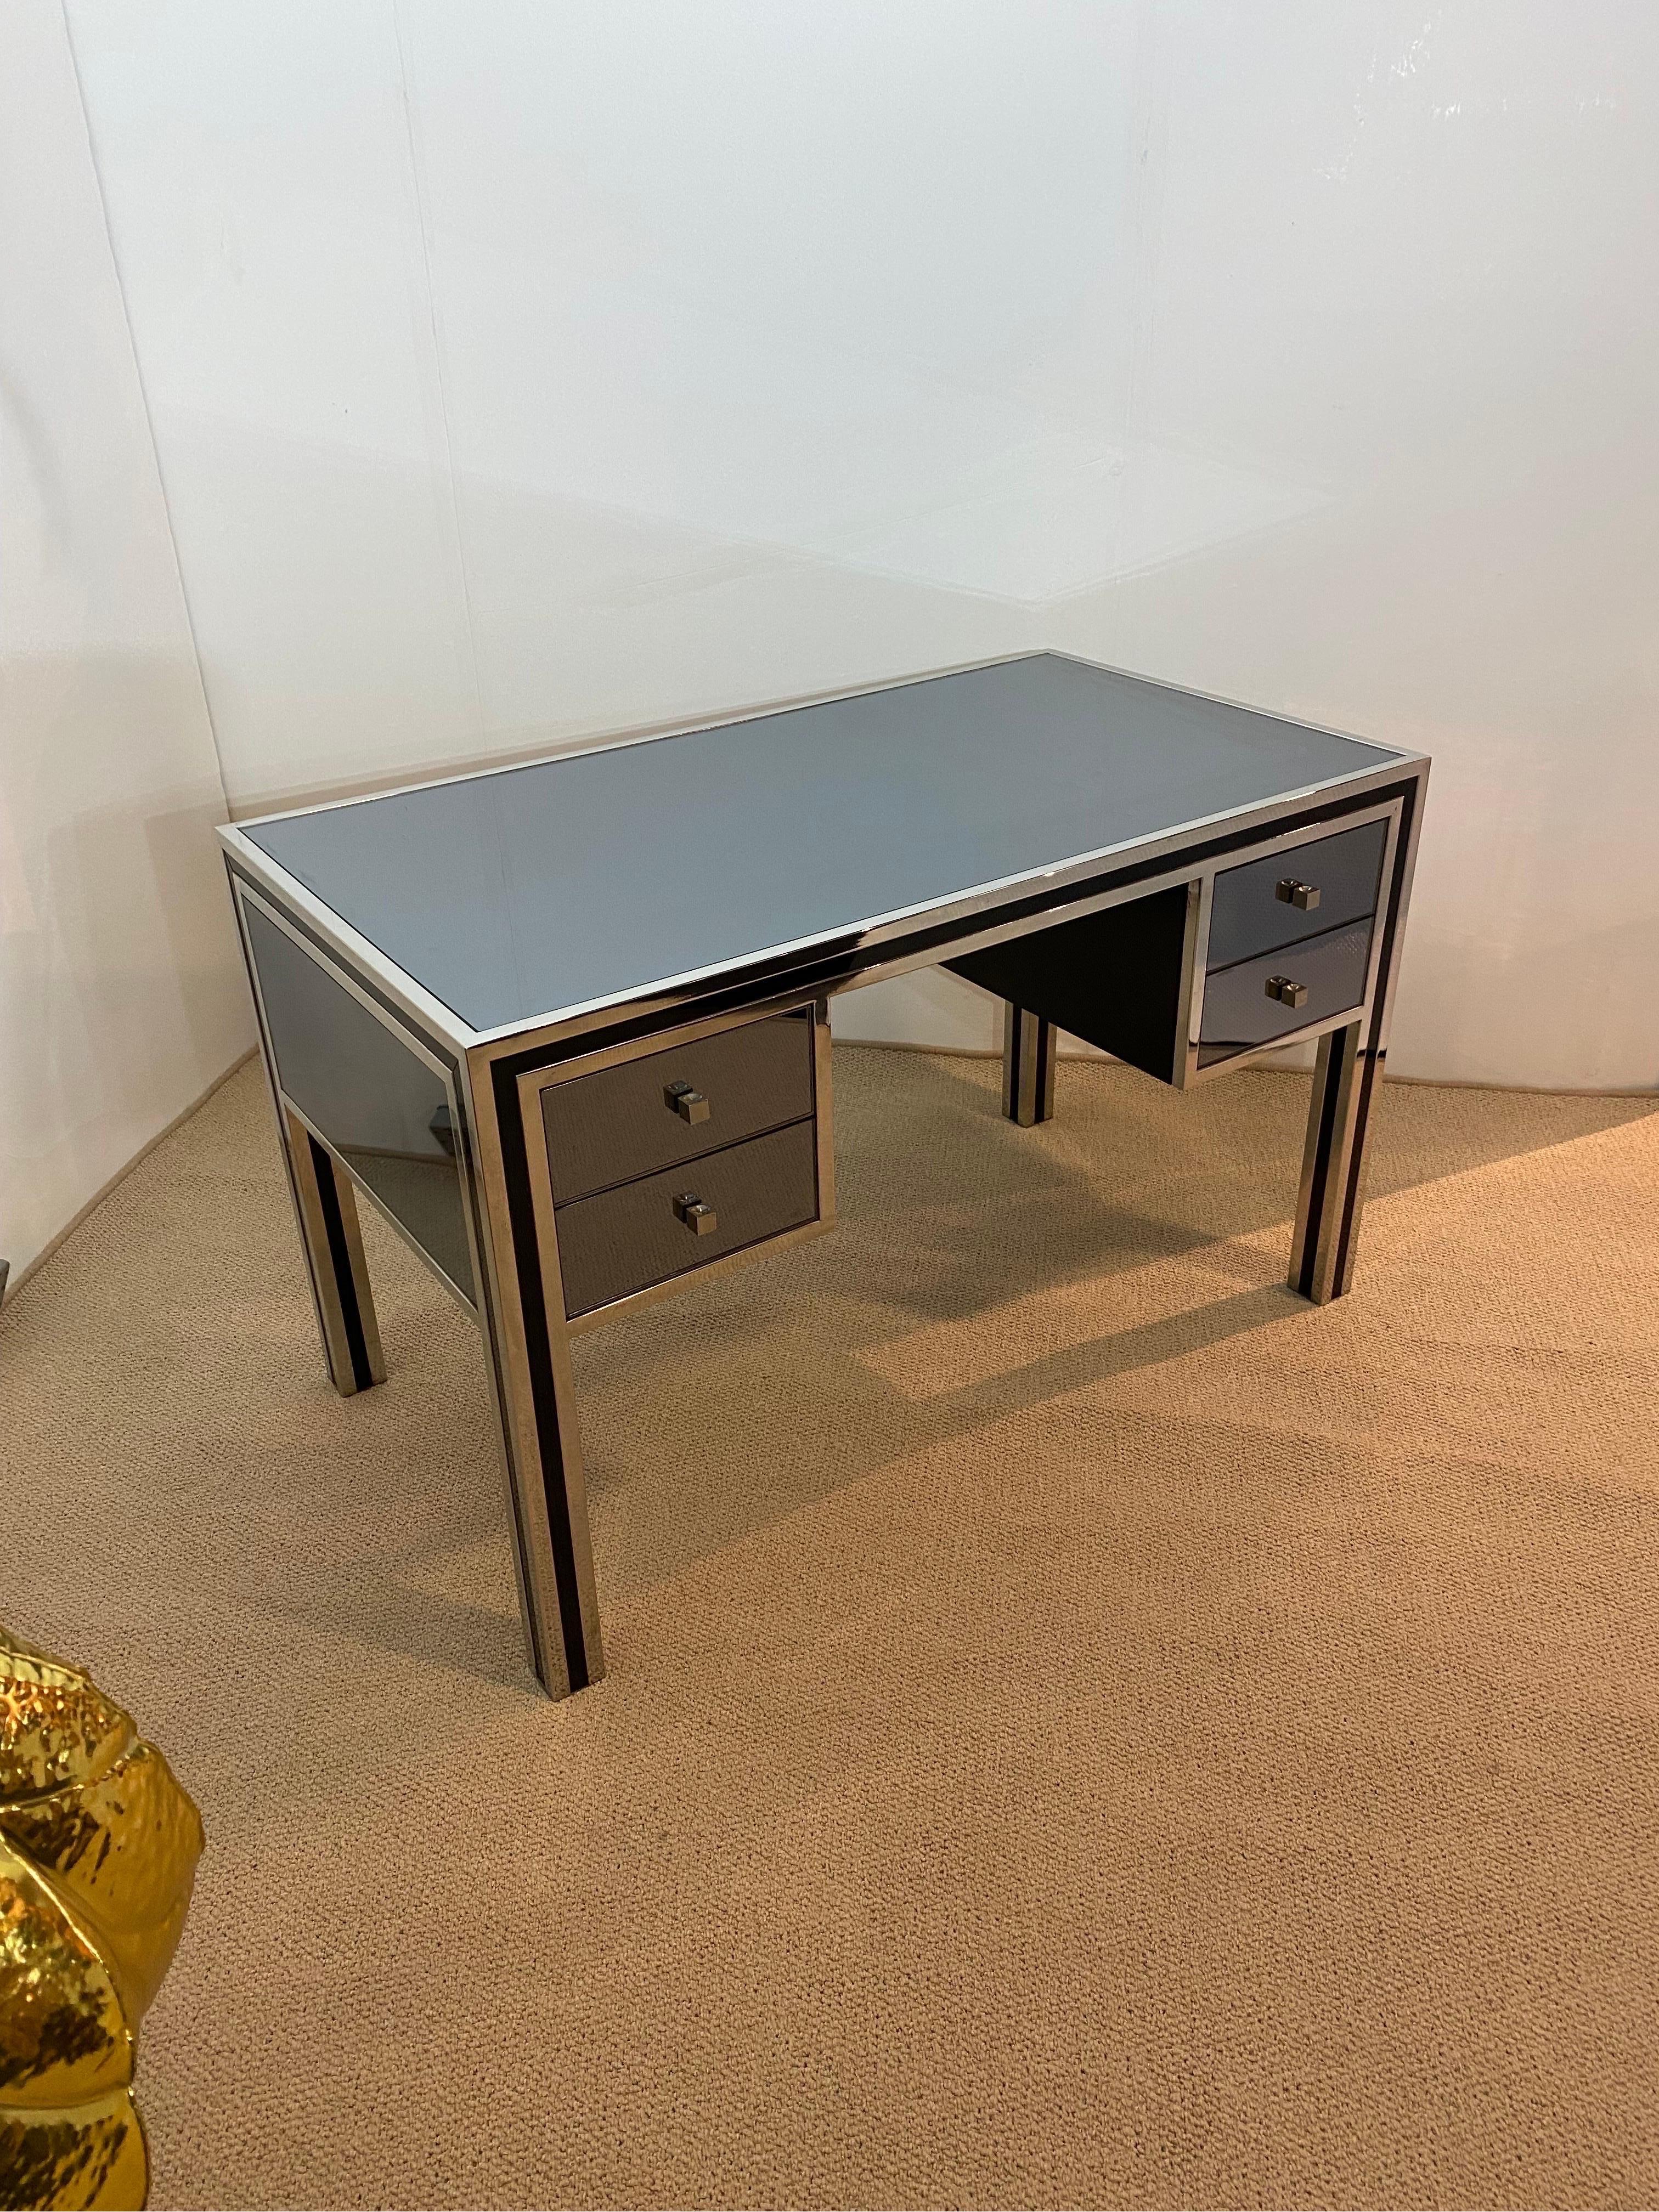 An extremely rare desk by designer Michele Pigneres made in the 1970s.
This desk is having all the characteristics from his designs such as the drawer pullers, the chrome framing and of course the smoked mirror. 

The desk is covered with a